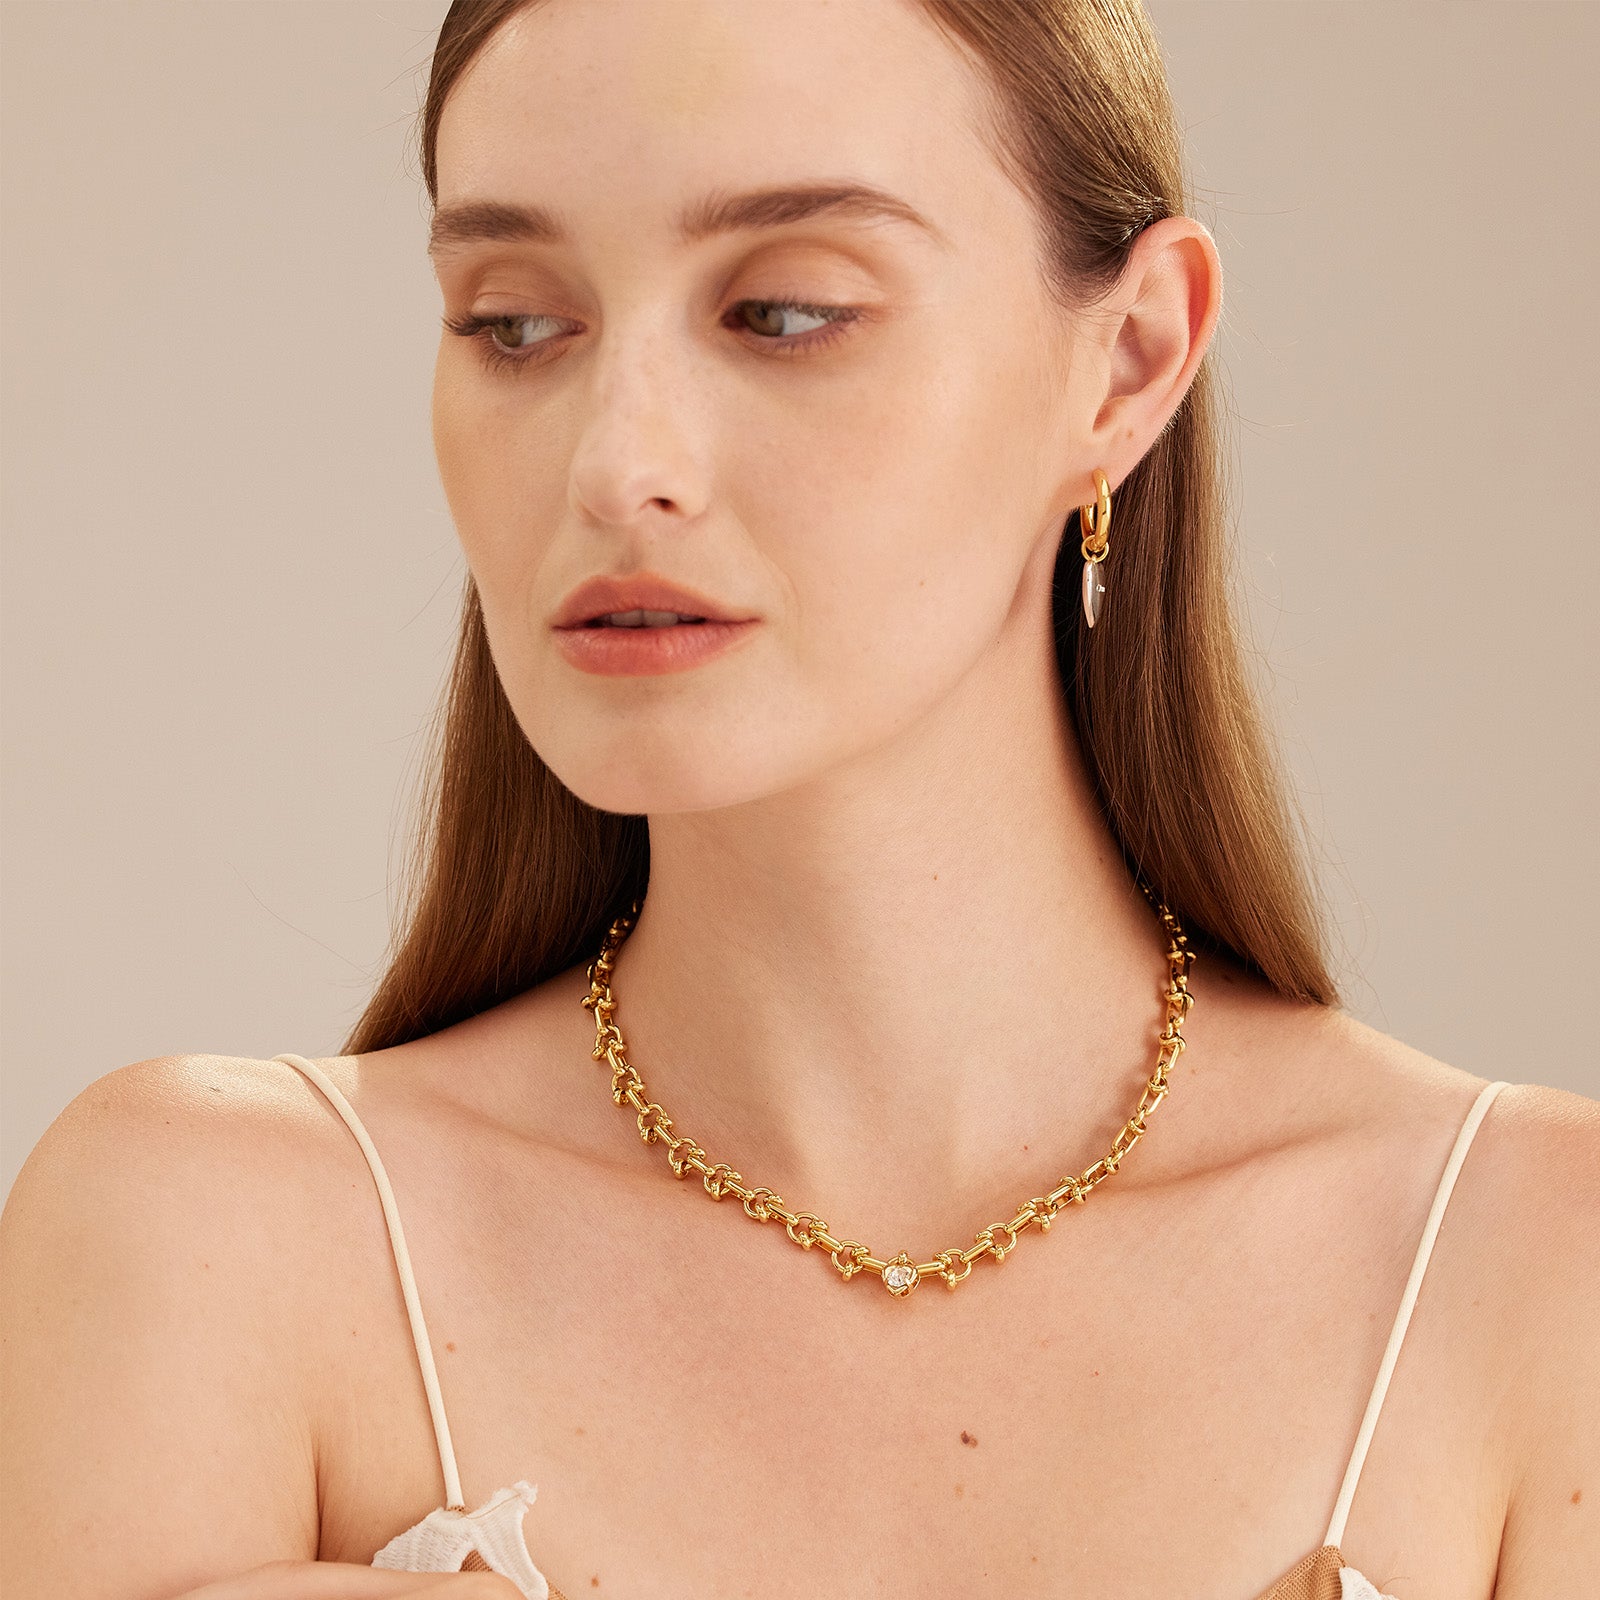 Gold Heart Diamond Chain Necklace, a luxurious expression of affection, this necklace combines the warmth of gold with the everlasting sparkle of diamonds, creating a romantic and refined accessory for special moments.